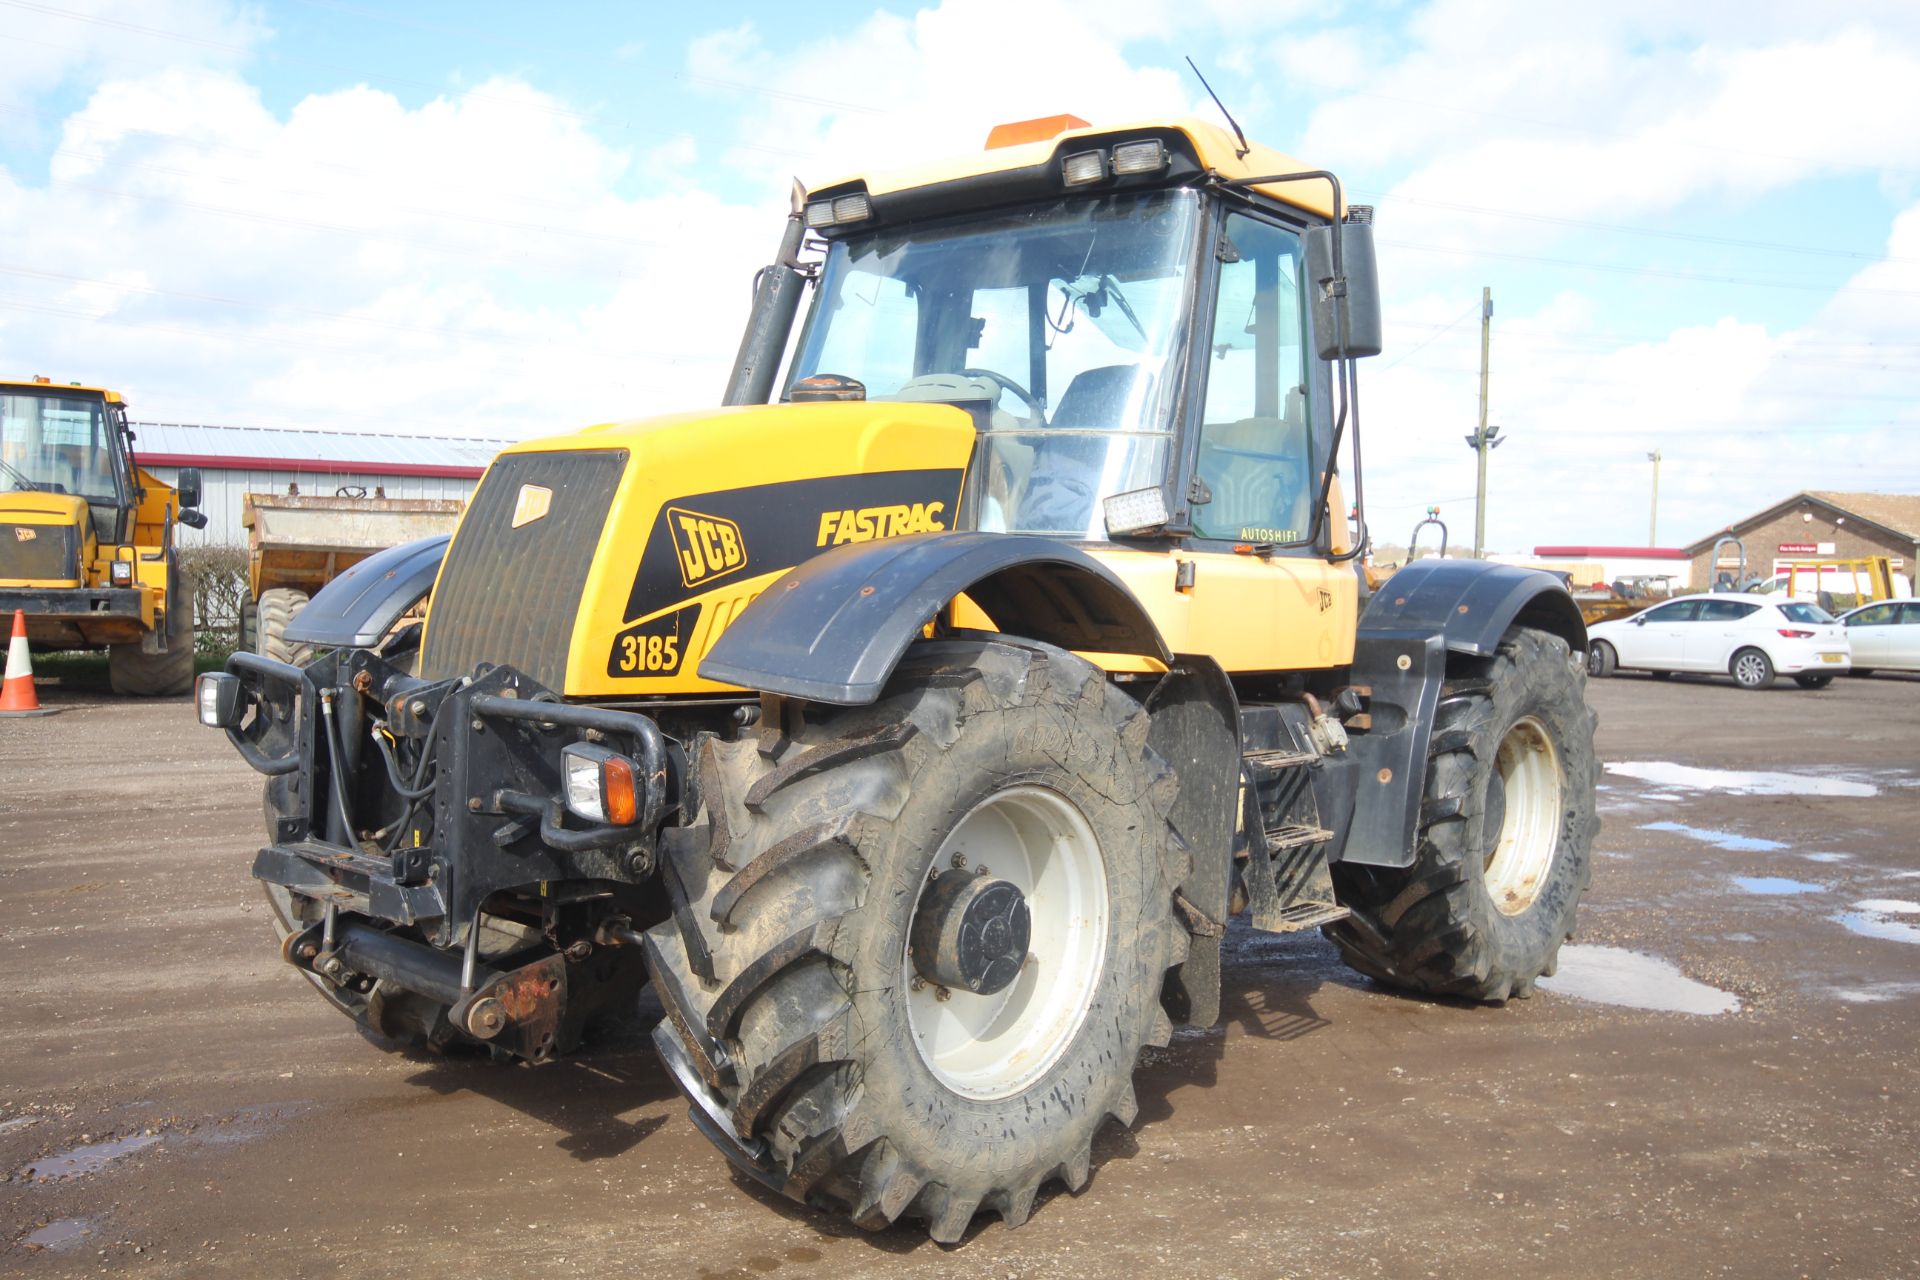 JCB Fastrac 3185 Autoshift 4WD tractor. Registration X642 AHT. Date of first registration 04/09/